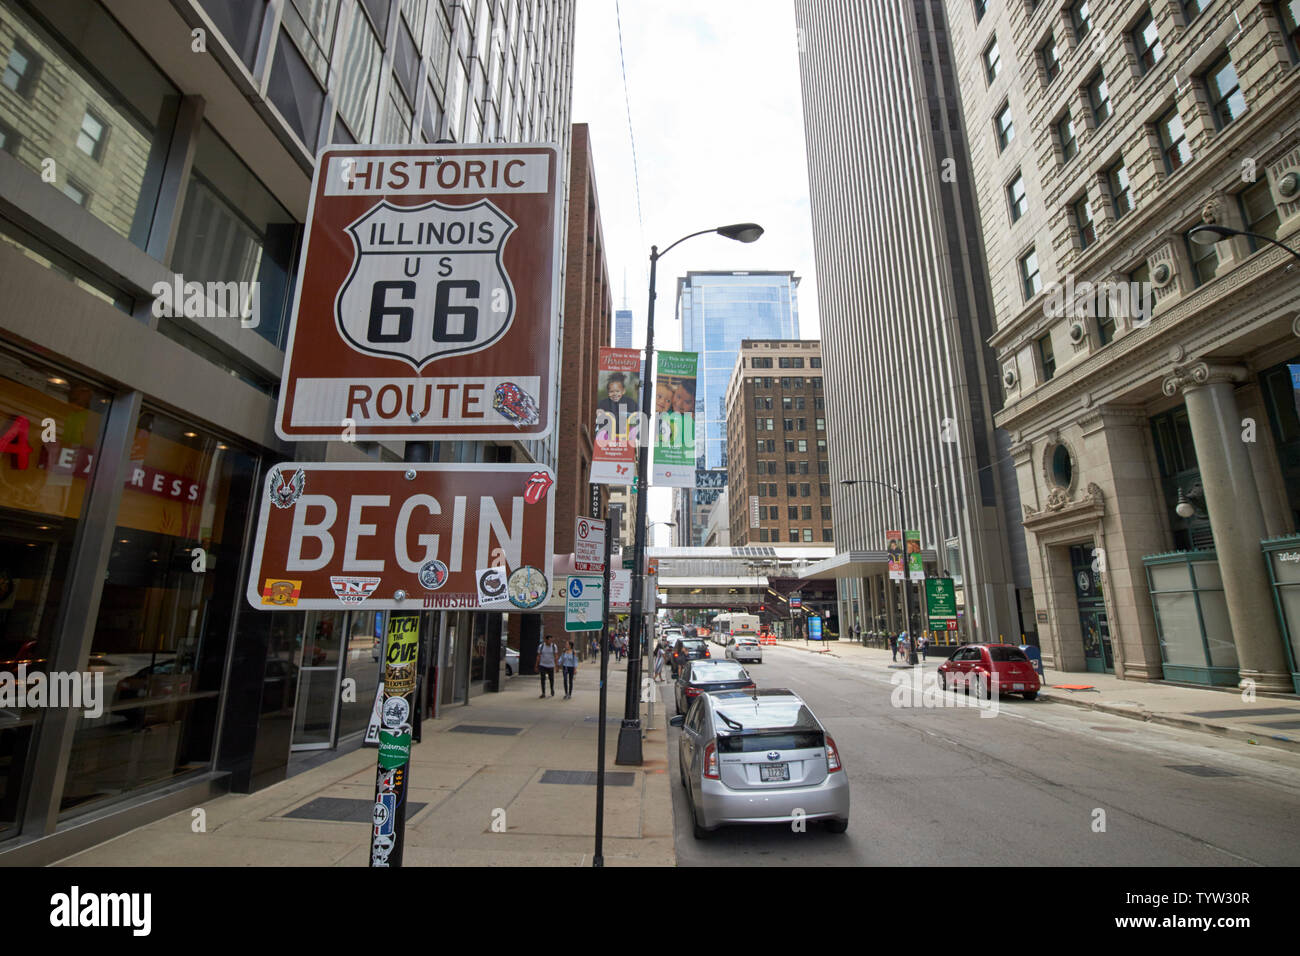 Historic Illinois US route 66 start begin sign in downtown Chicago IL USA  Stock Photo - Alamy